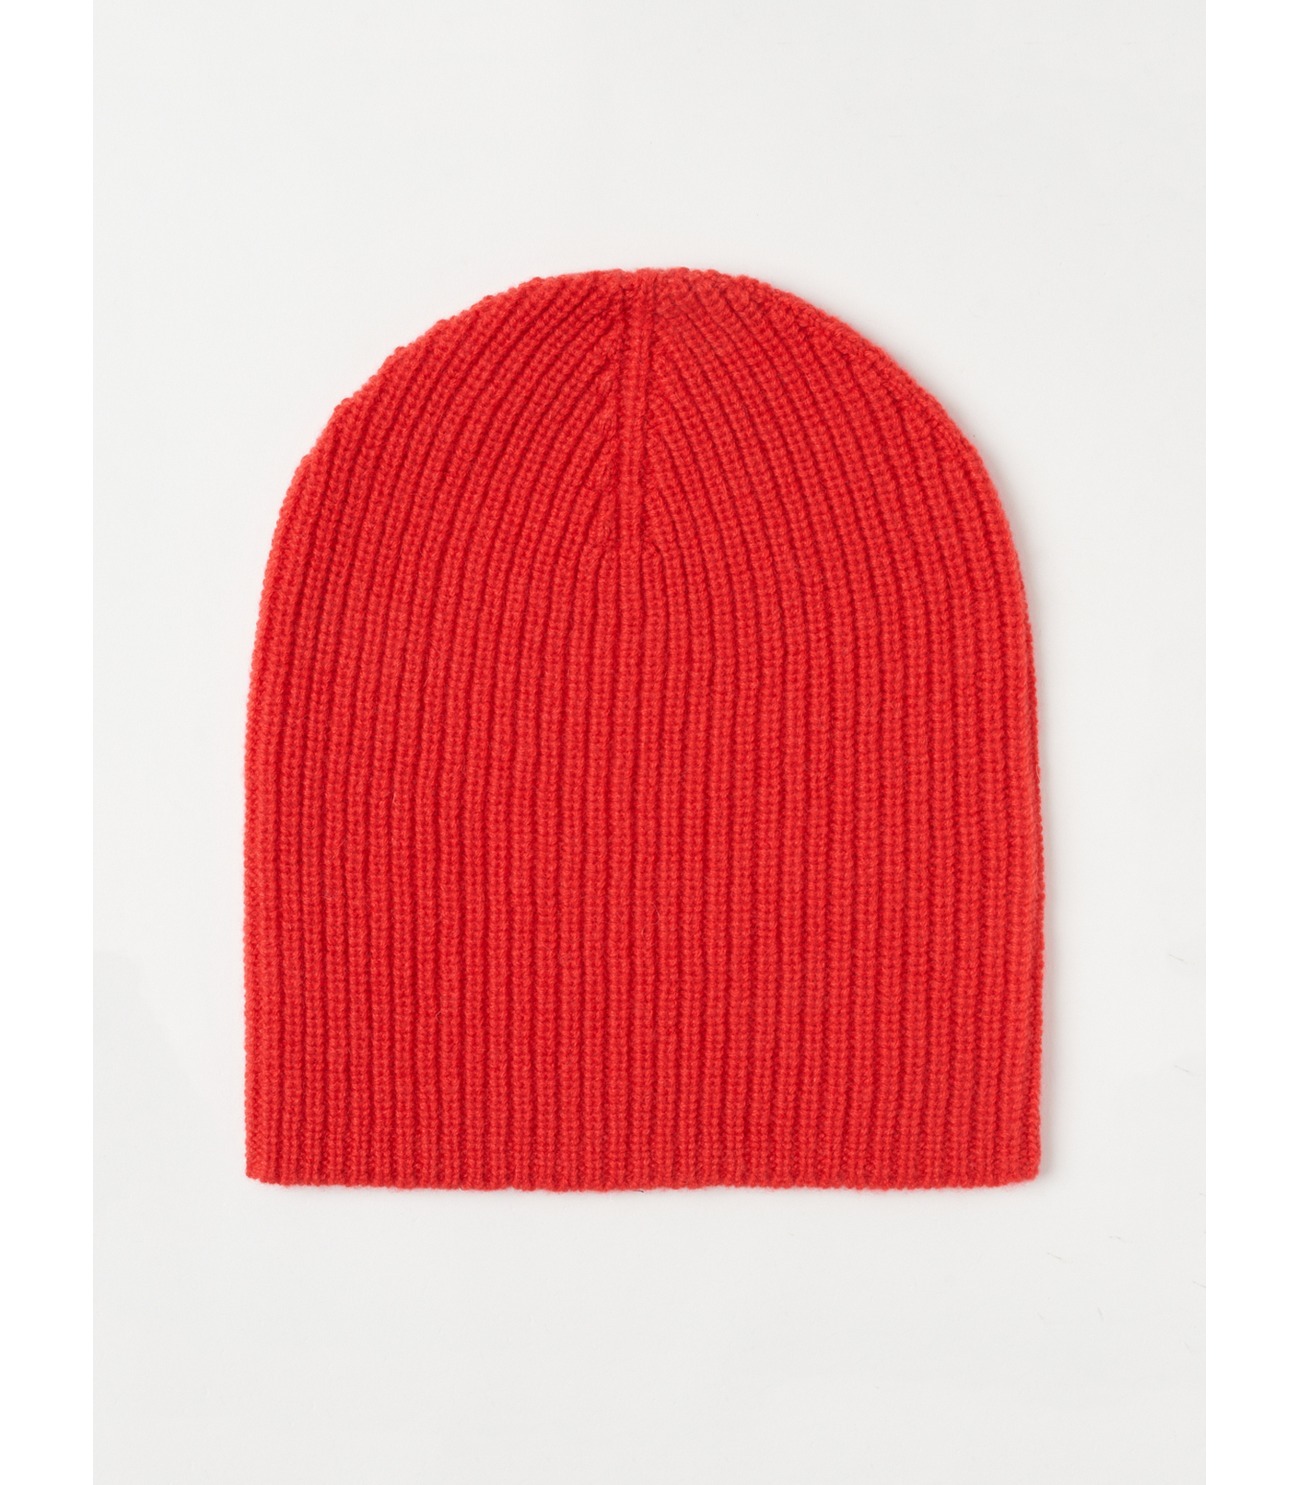 Holiday cashmere cap 詳細画像 red 1